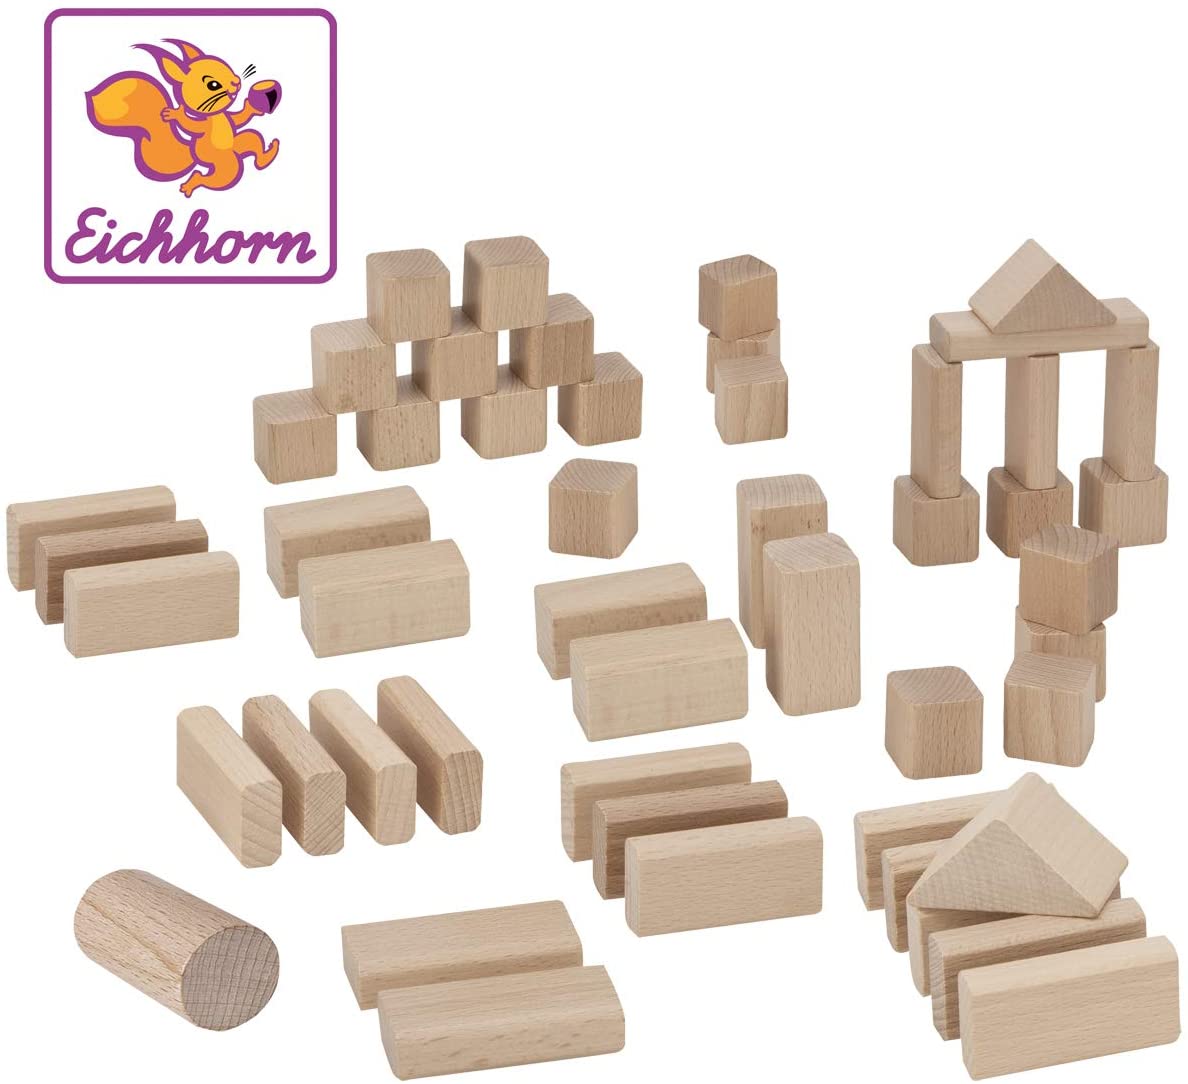 Eichhorn Colourful Wooden Building Blocks In One Shape, 25 Mm